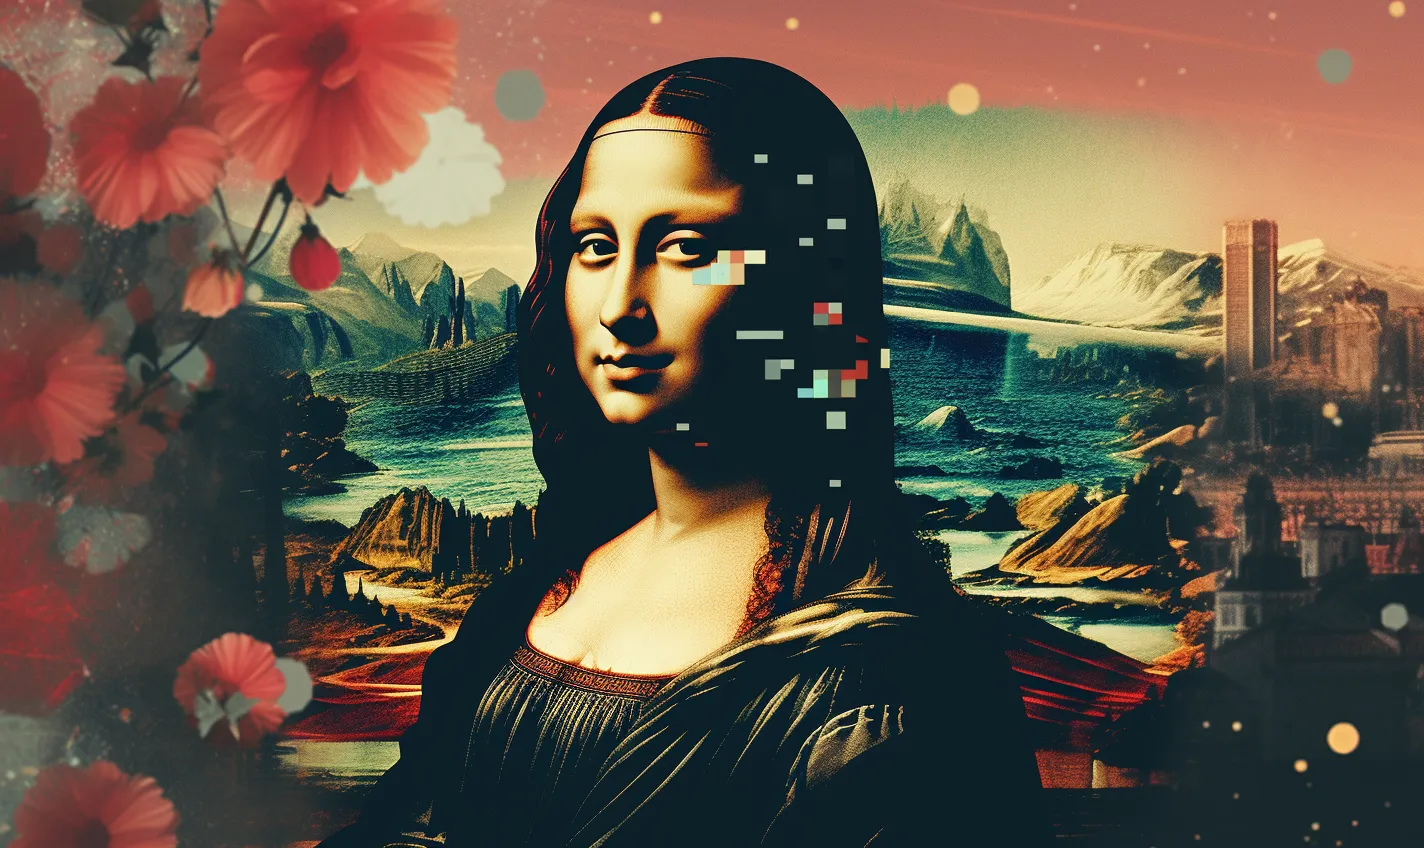 A digital version of the Mona Lisa with a pixelated effect - Mona Lisa